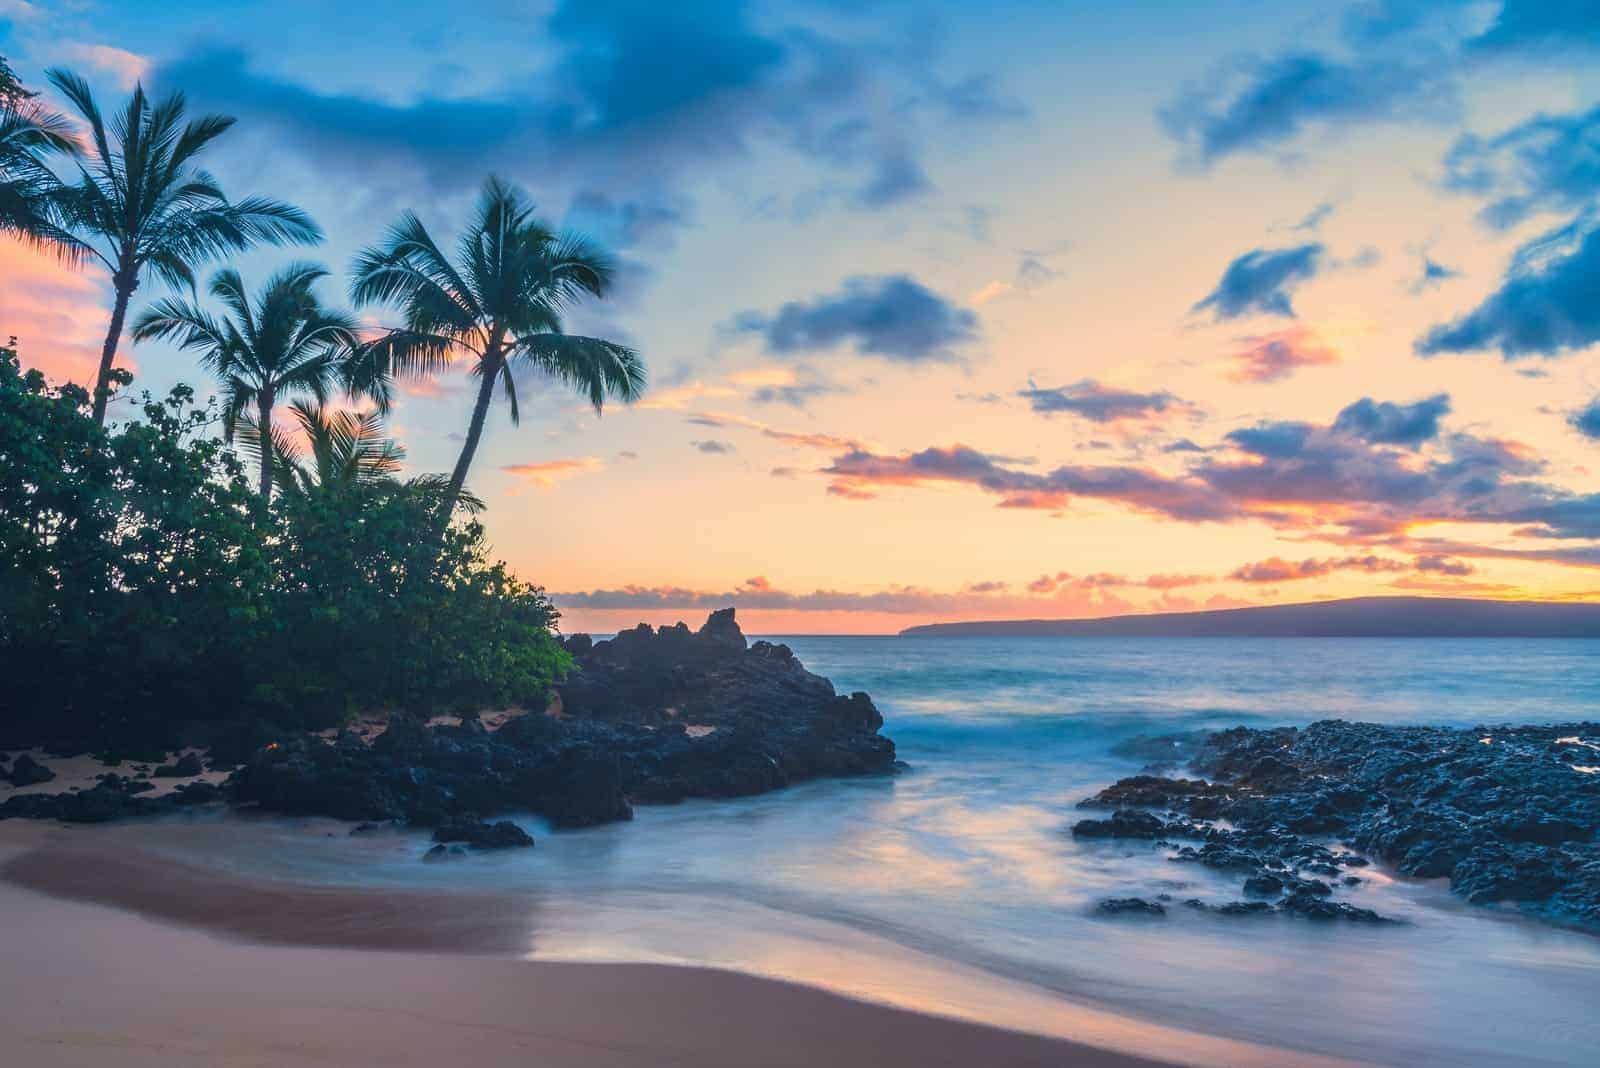 Tourist attractions in Hawaii, USA